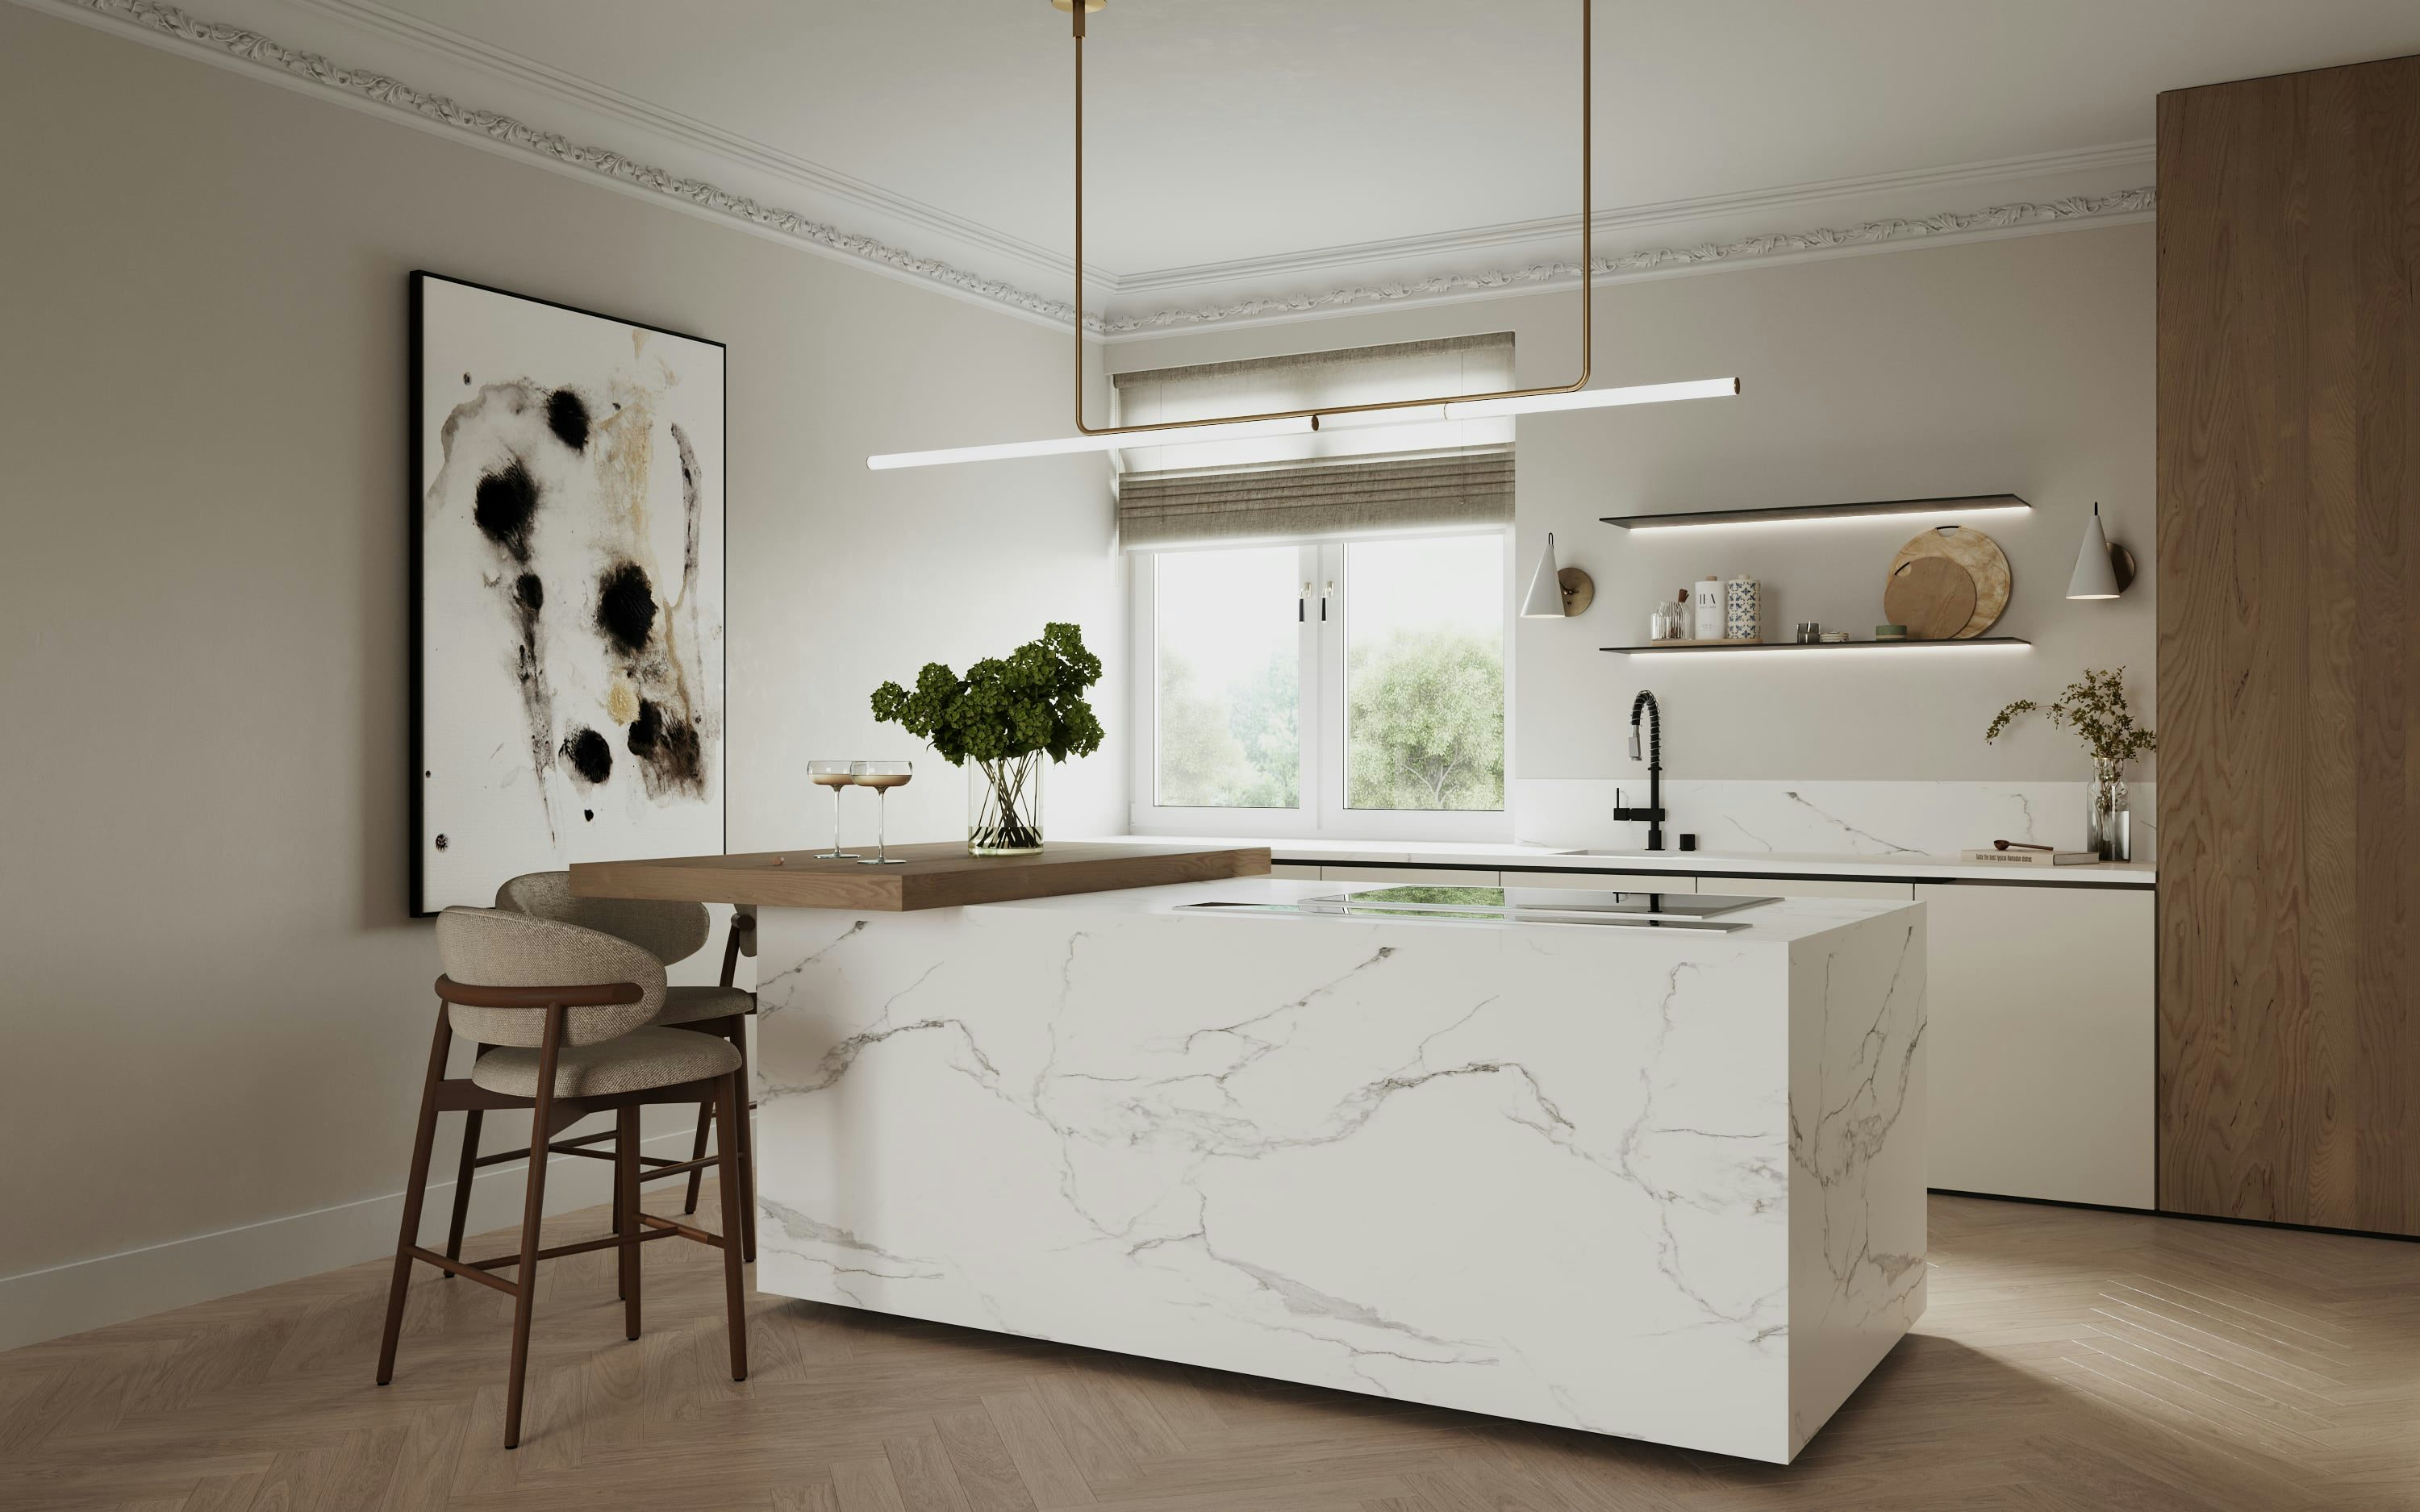 3D Interior Visualization of renovation of kitchen with island in old building apartment, Hamburg Germany